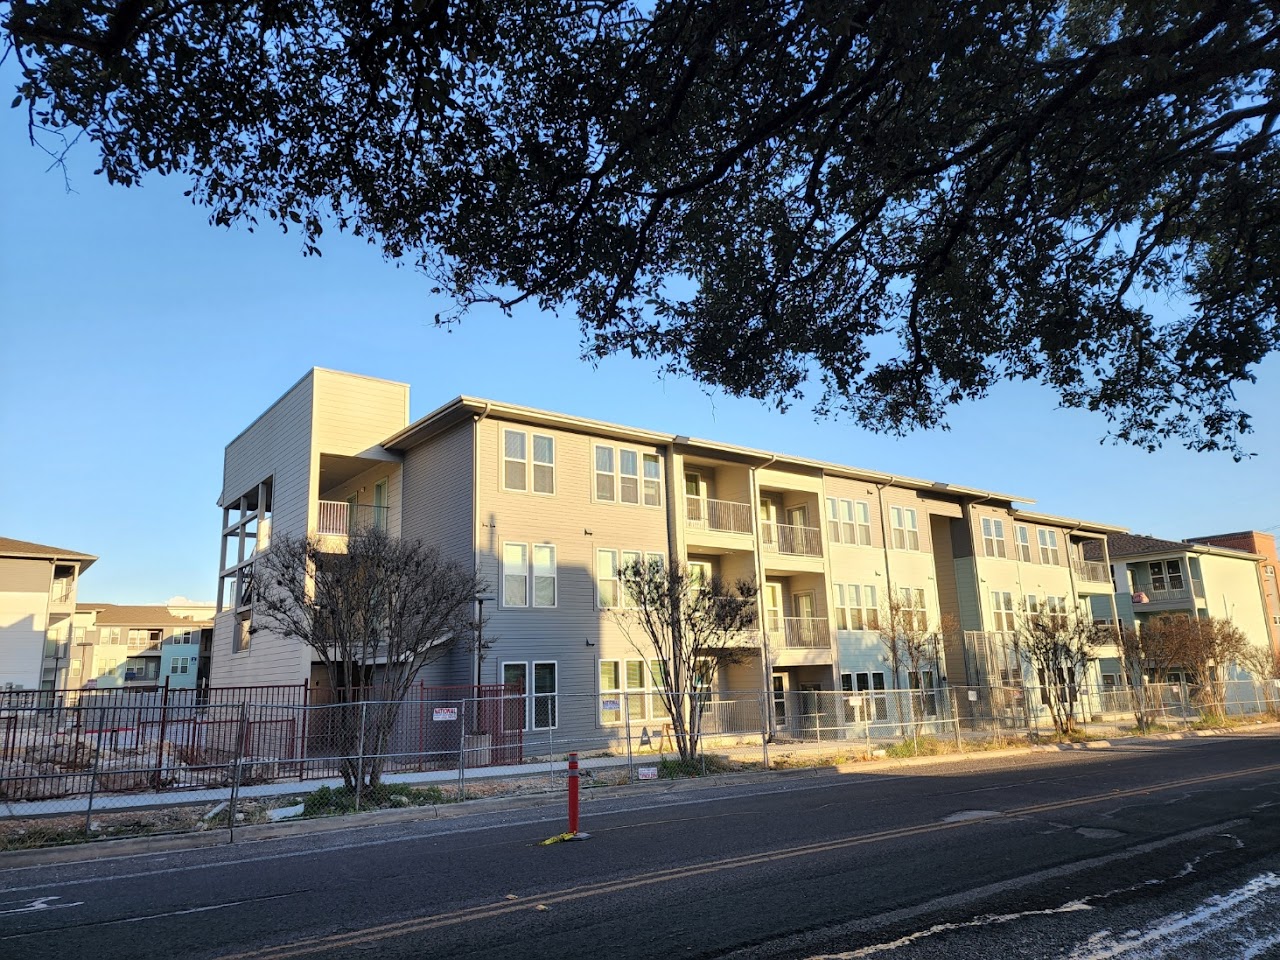 Photo of PARK AT 38THIRTY. Affordable housing located at 3830 PARKDALE STREET SAN ANTONIO, TX 78229